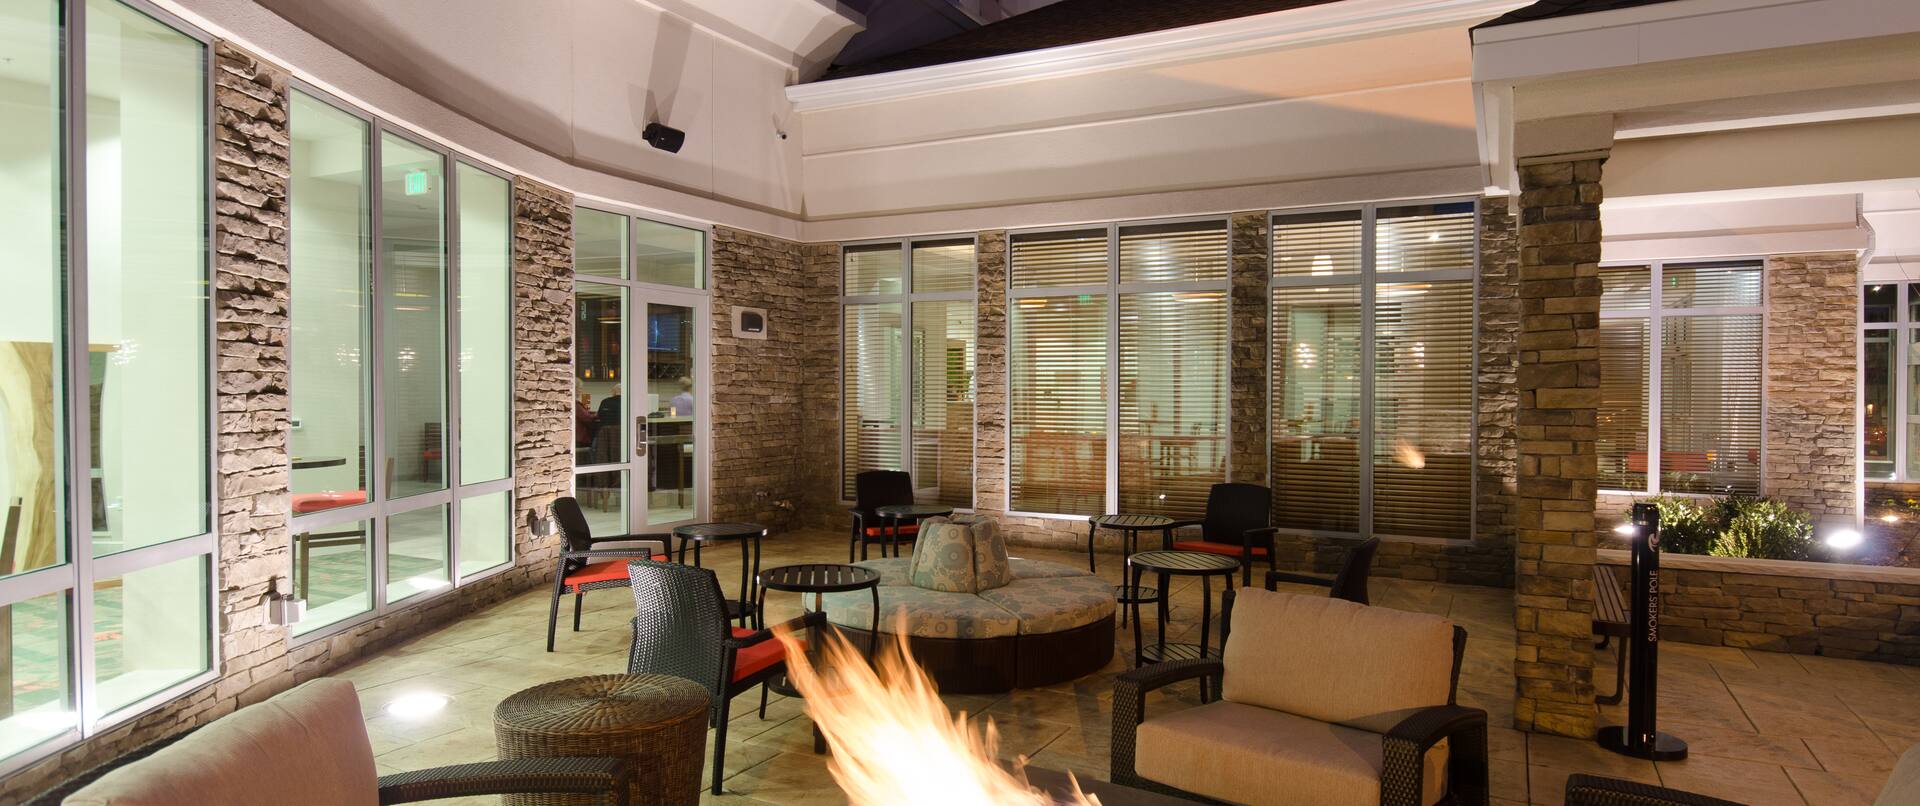 Outdoor Seating Area and Fire Pit at Night